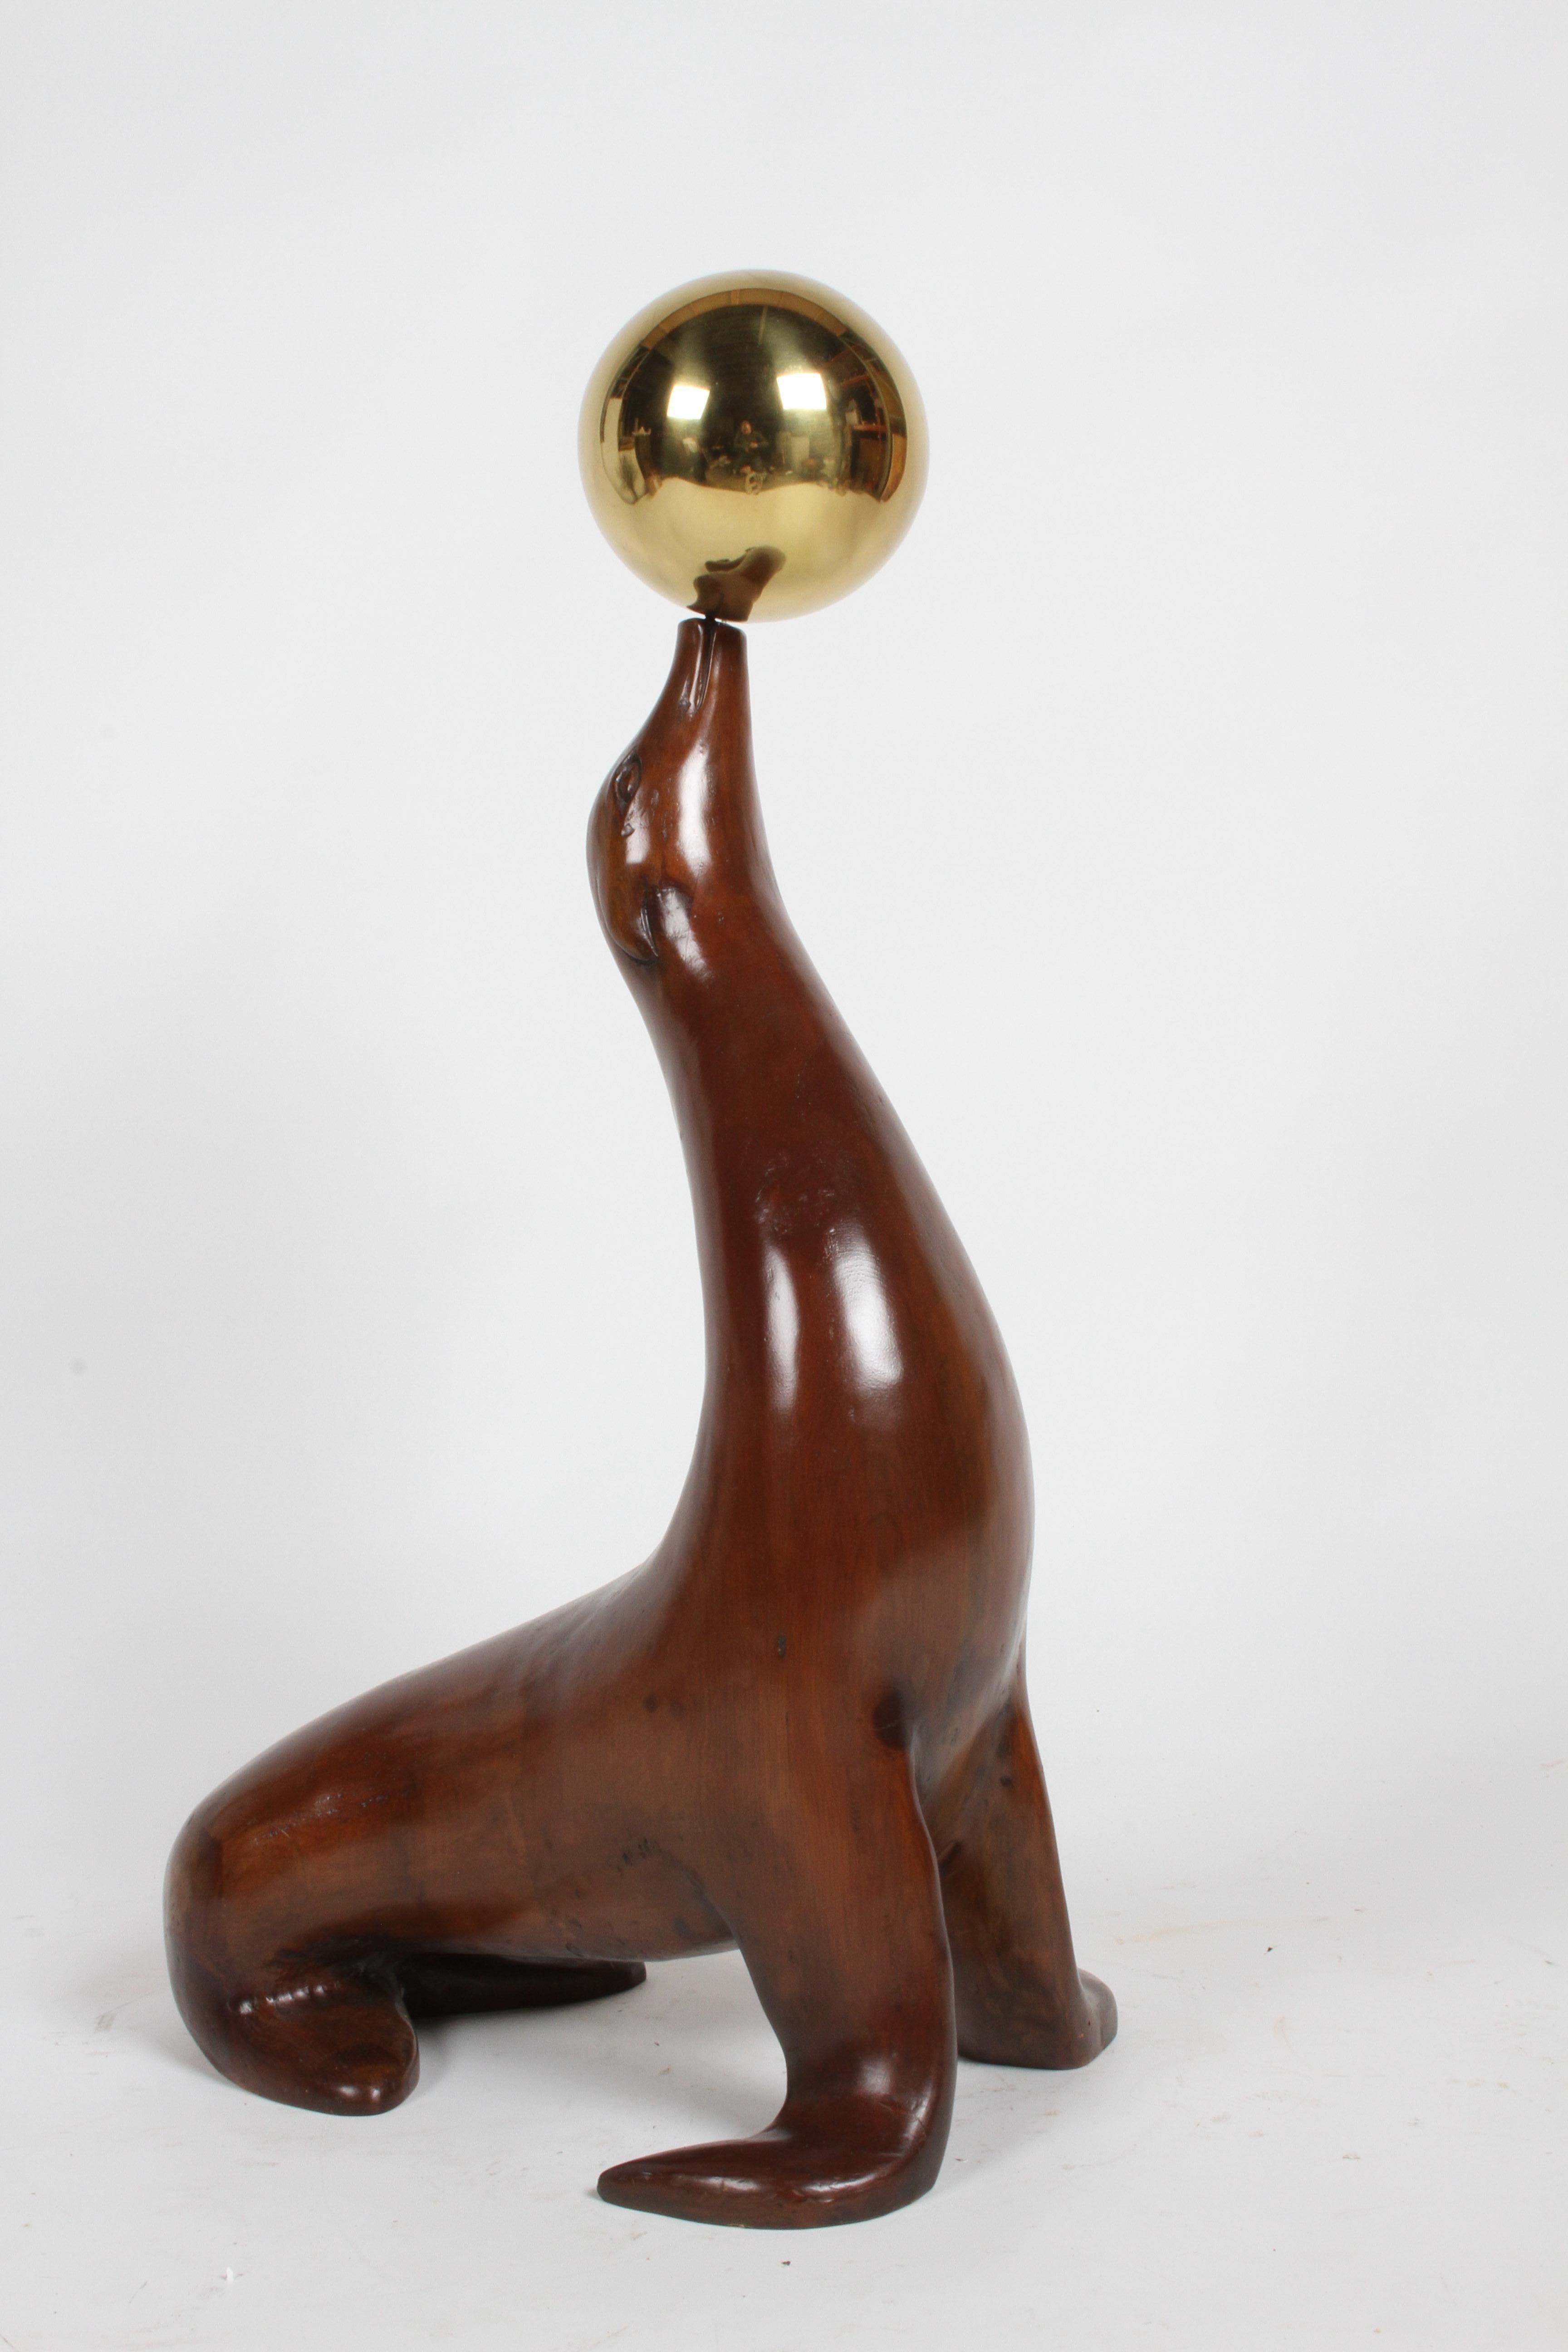 Straight out of an interior from the exuberance, glam and high style days of 1970s. This large scale vintage English sculpture of a sea lion or seal is carved out of elmwood, balancing a large brass ball on his nose. A rare find, in very nice